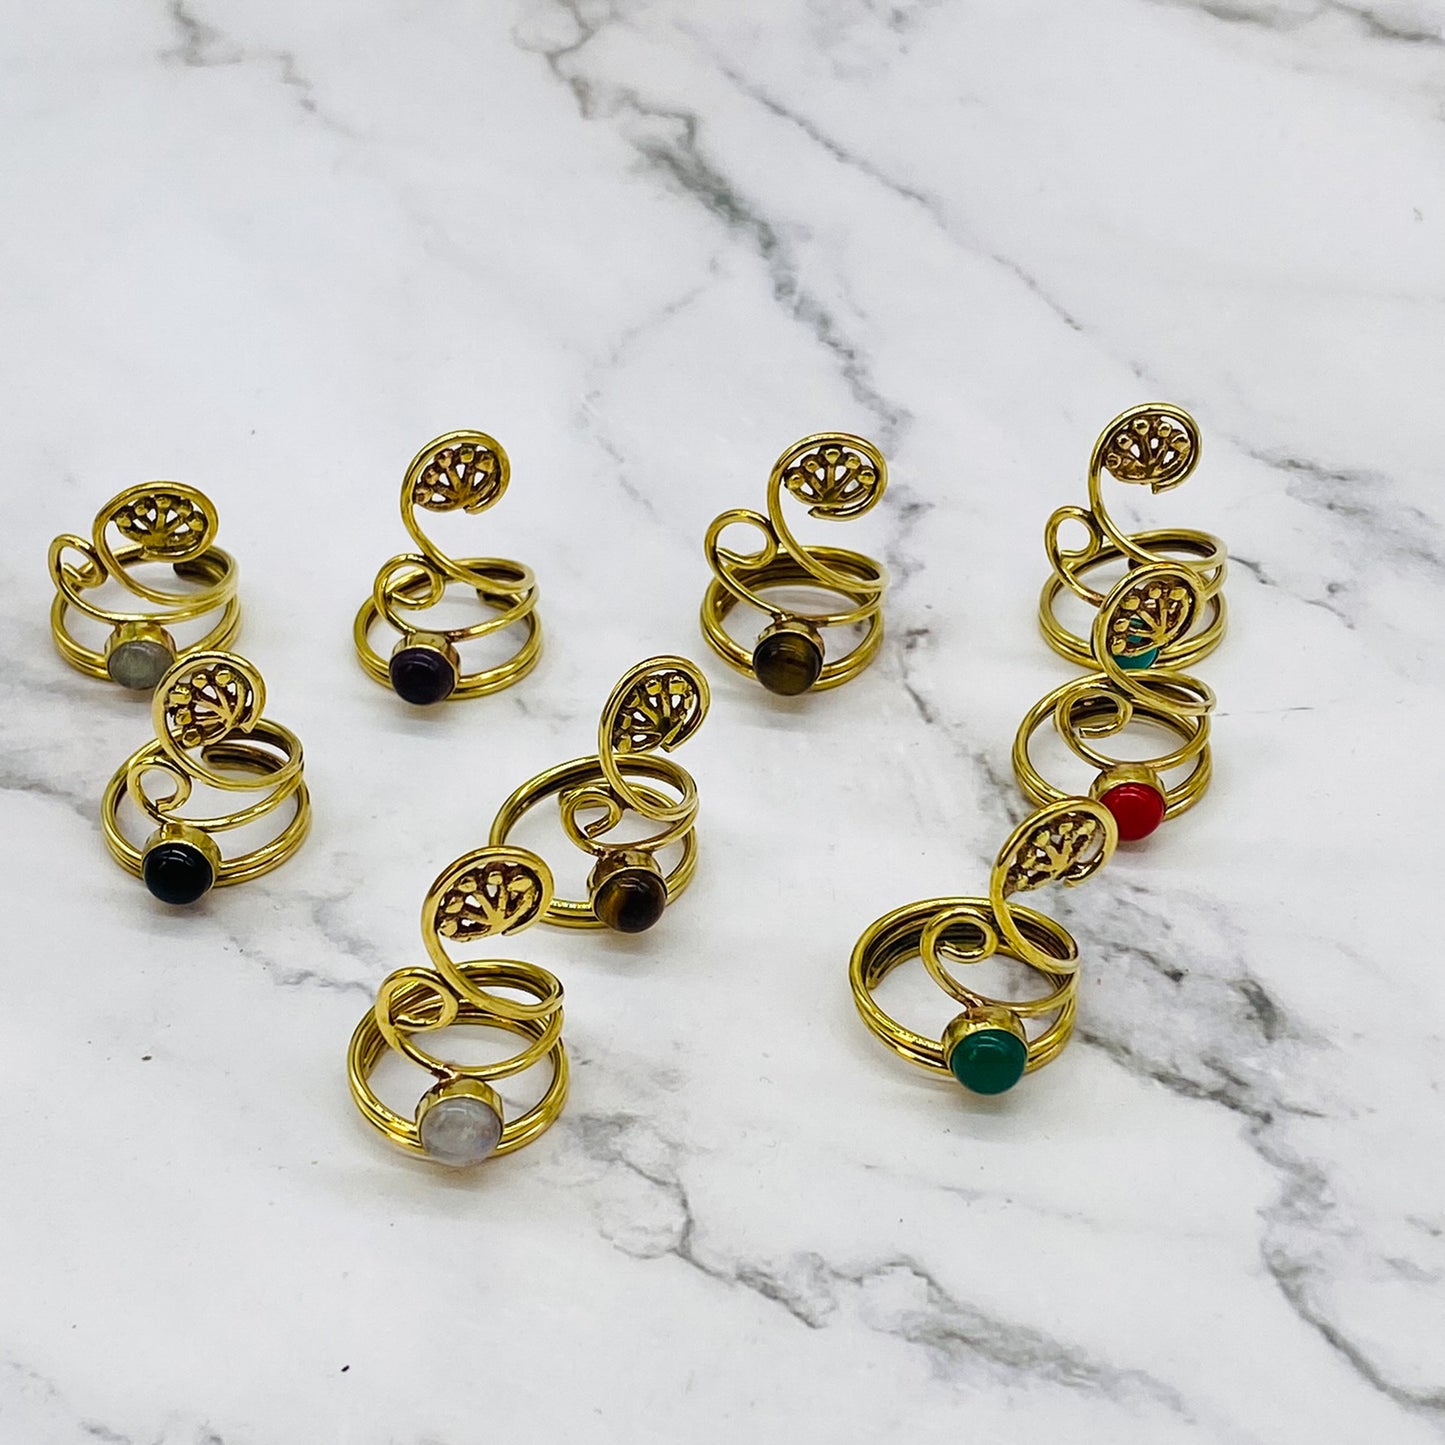 Vintage Gold Filled Rings, Handmade Jewelry, Crystal Rings, Bohemian Jewelry, Statement Rings, Ethnic Jewelry, Adjustable Non Tarnish Rings